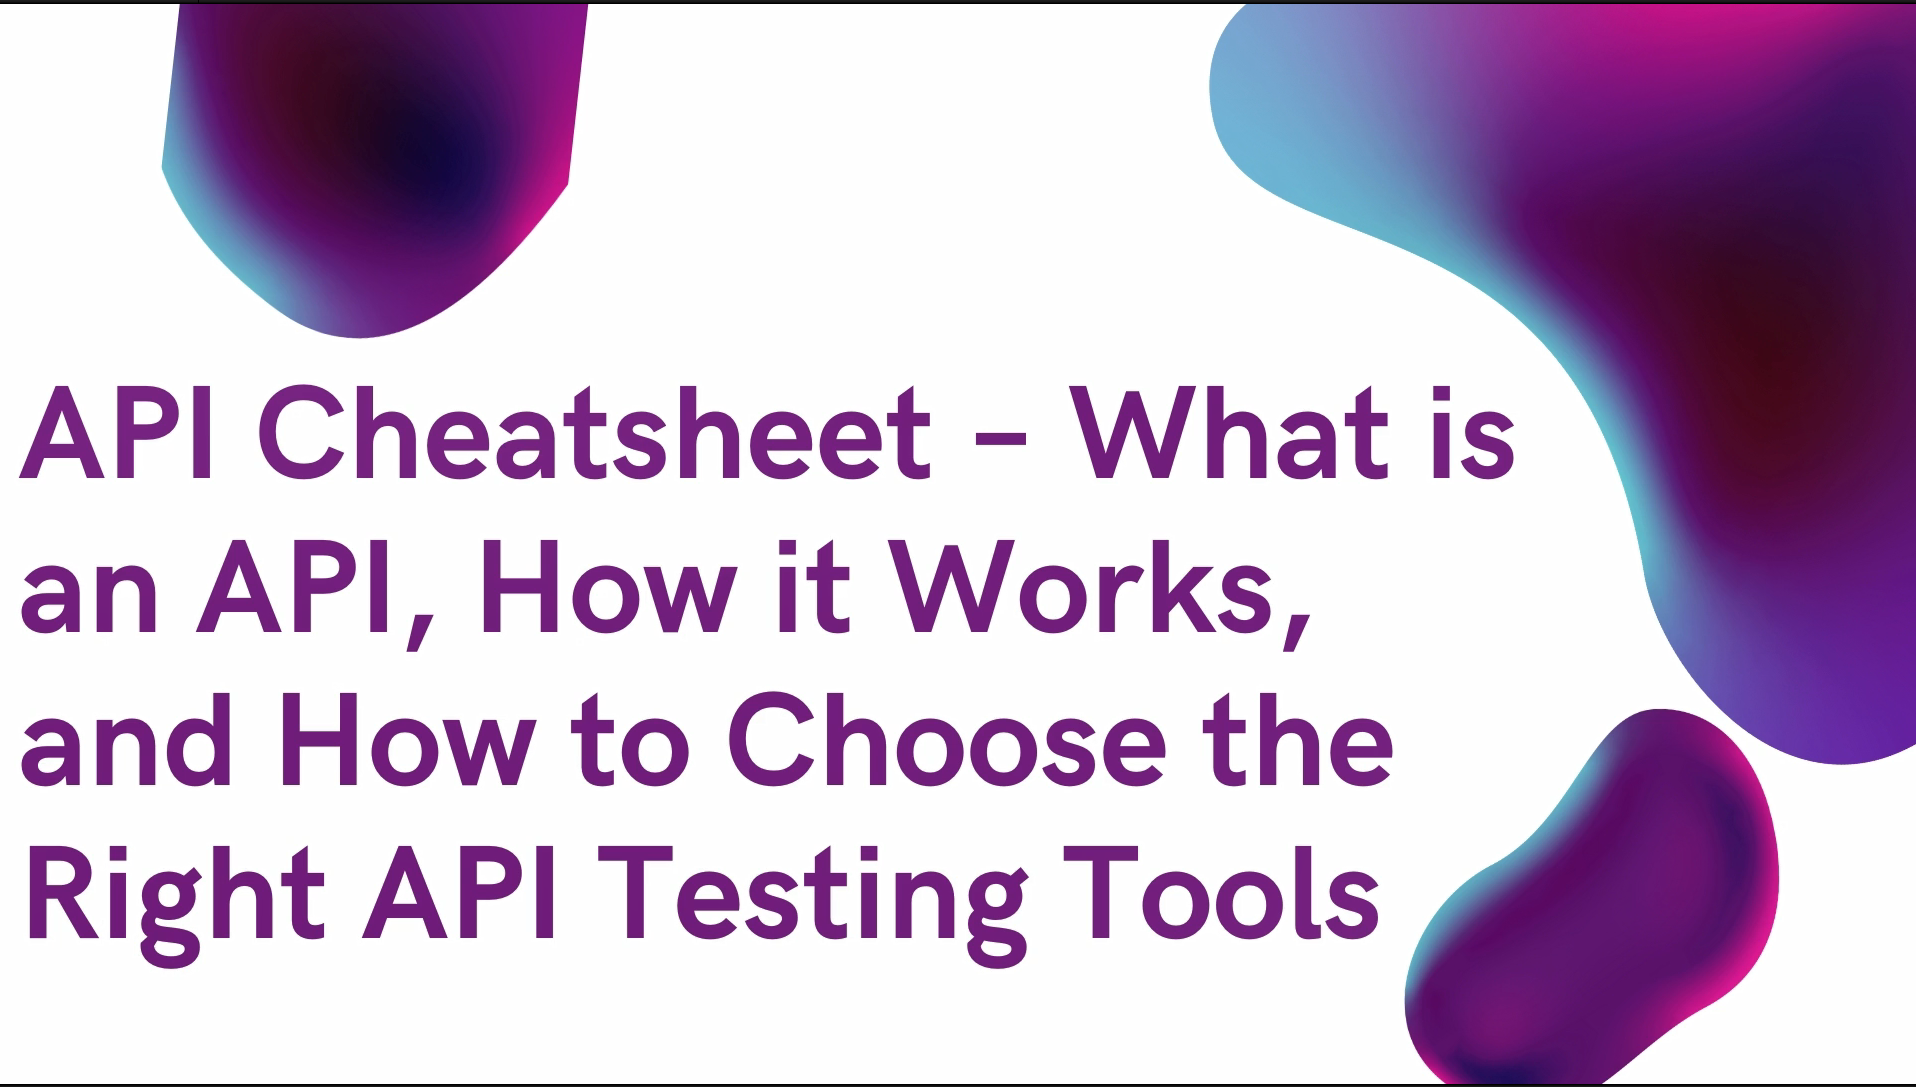 API Cheat Sheet – What is an API, How it Works, and How to Choose the Right API Testing Tools